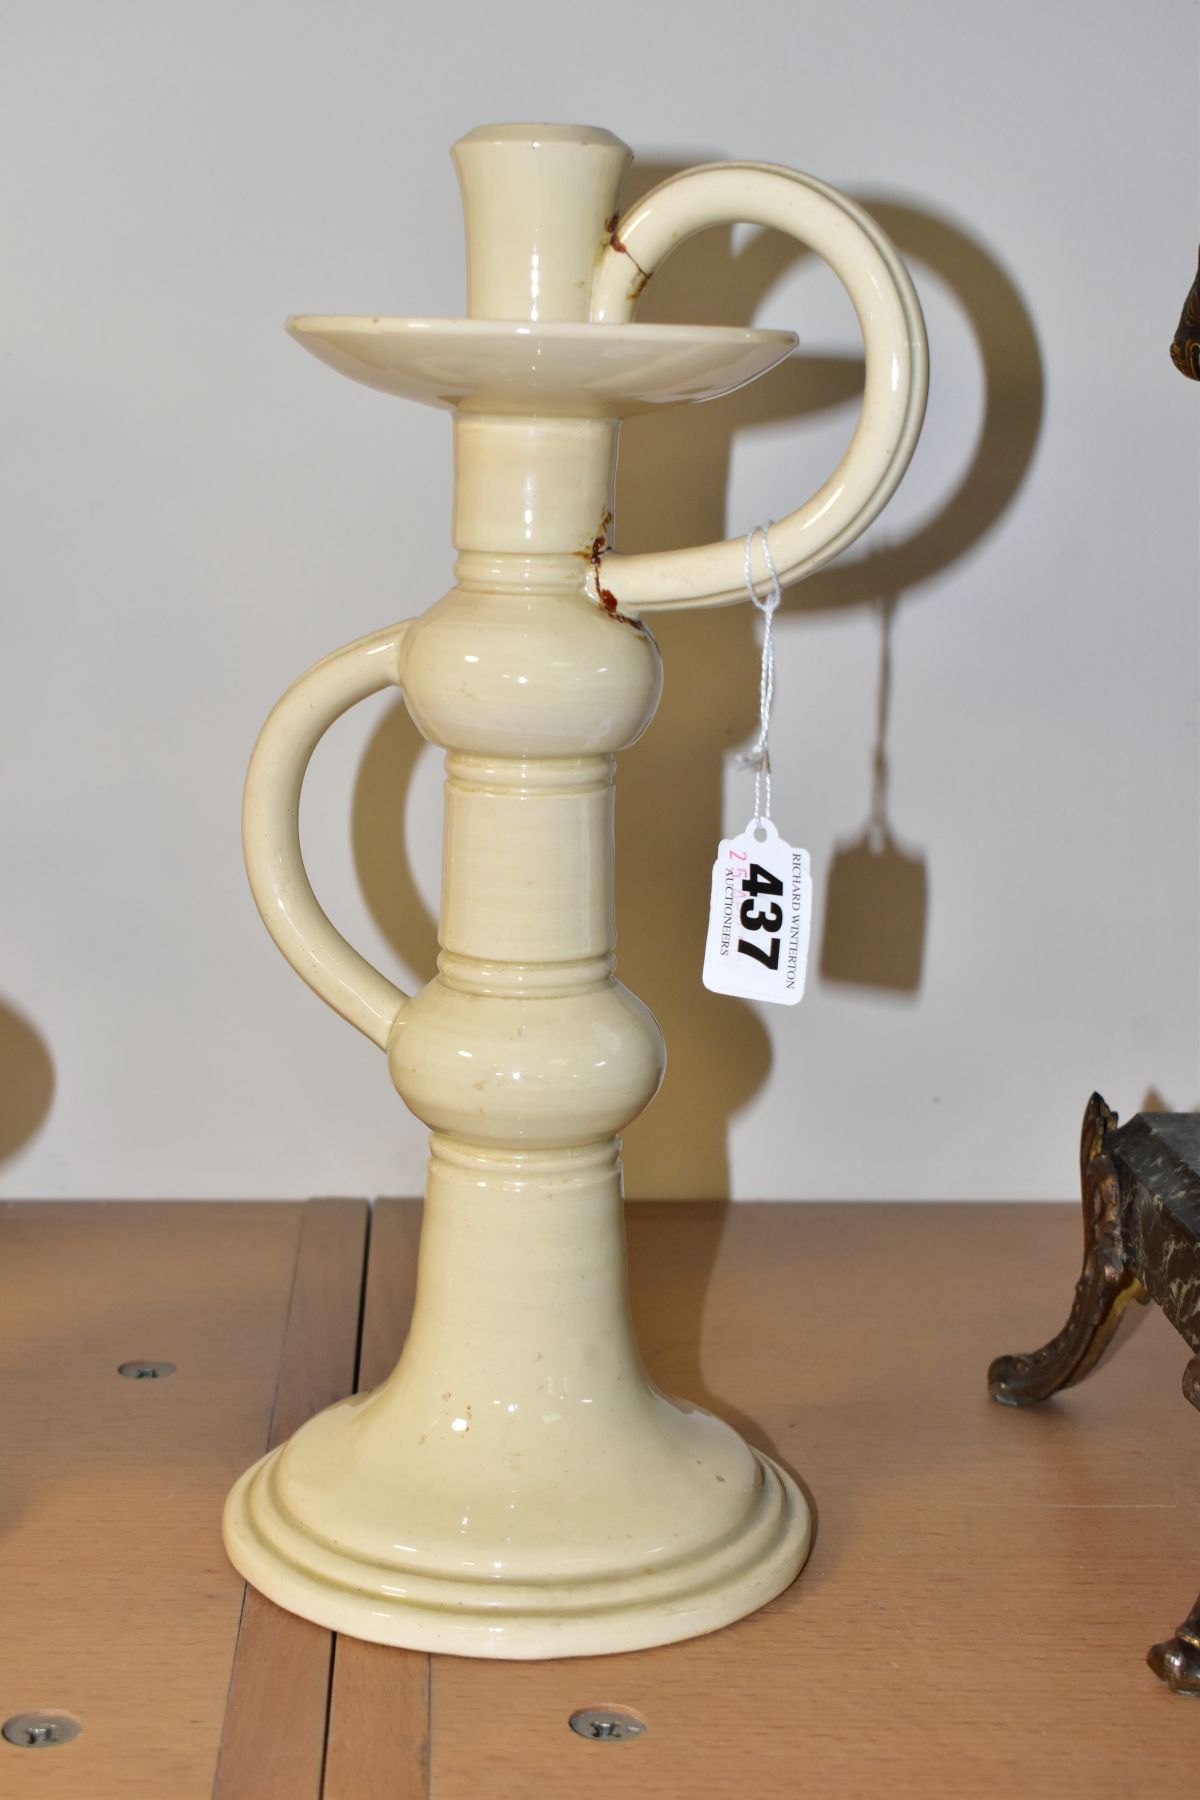 A WILEMAN & CO FOLEY FAIENCE ART POTTERY CANDLESTICK IN A CREAM 'SPANO-LUSTRA' GLAZE, with two